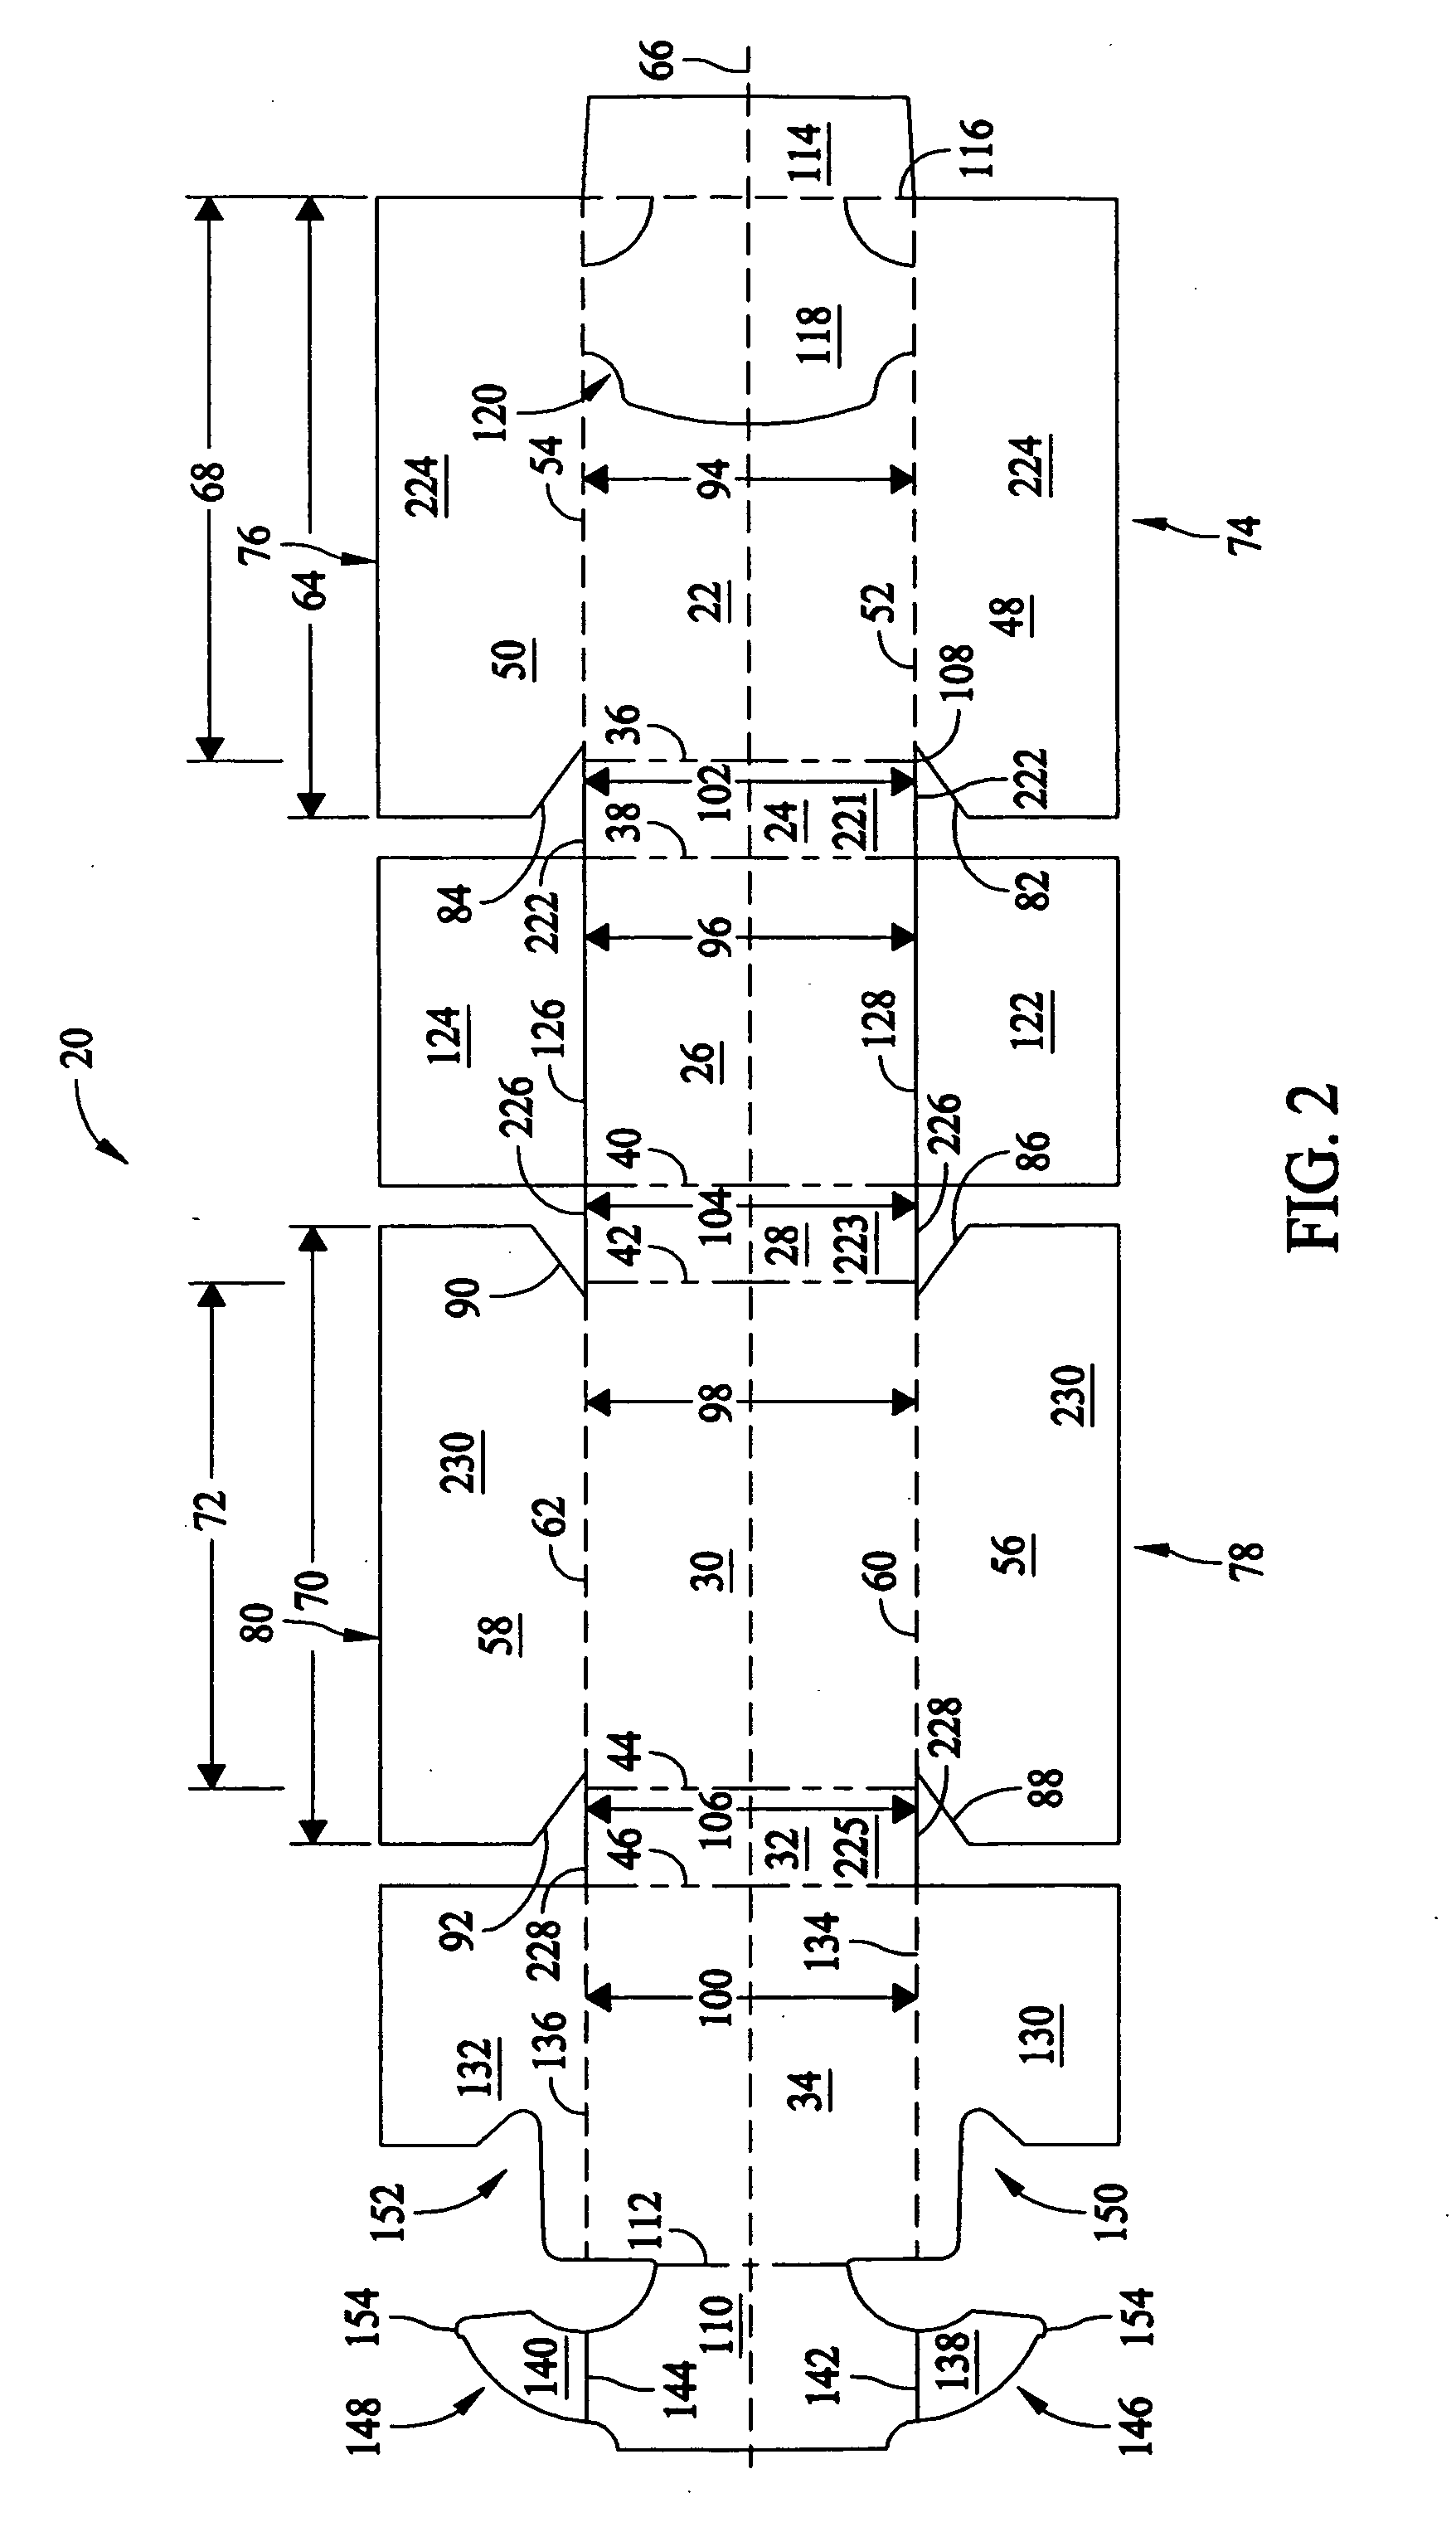 Blank and methods and apparatus for forming a dispenser case from the blank